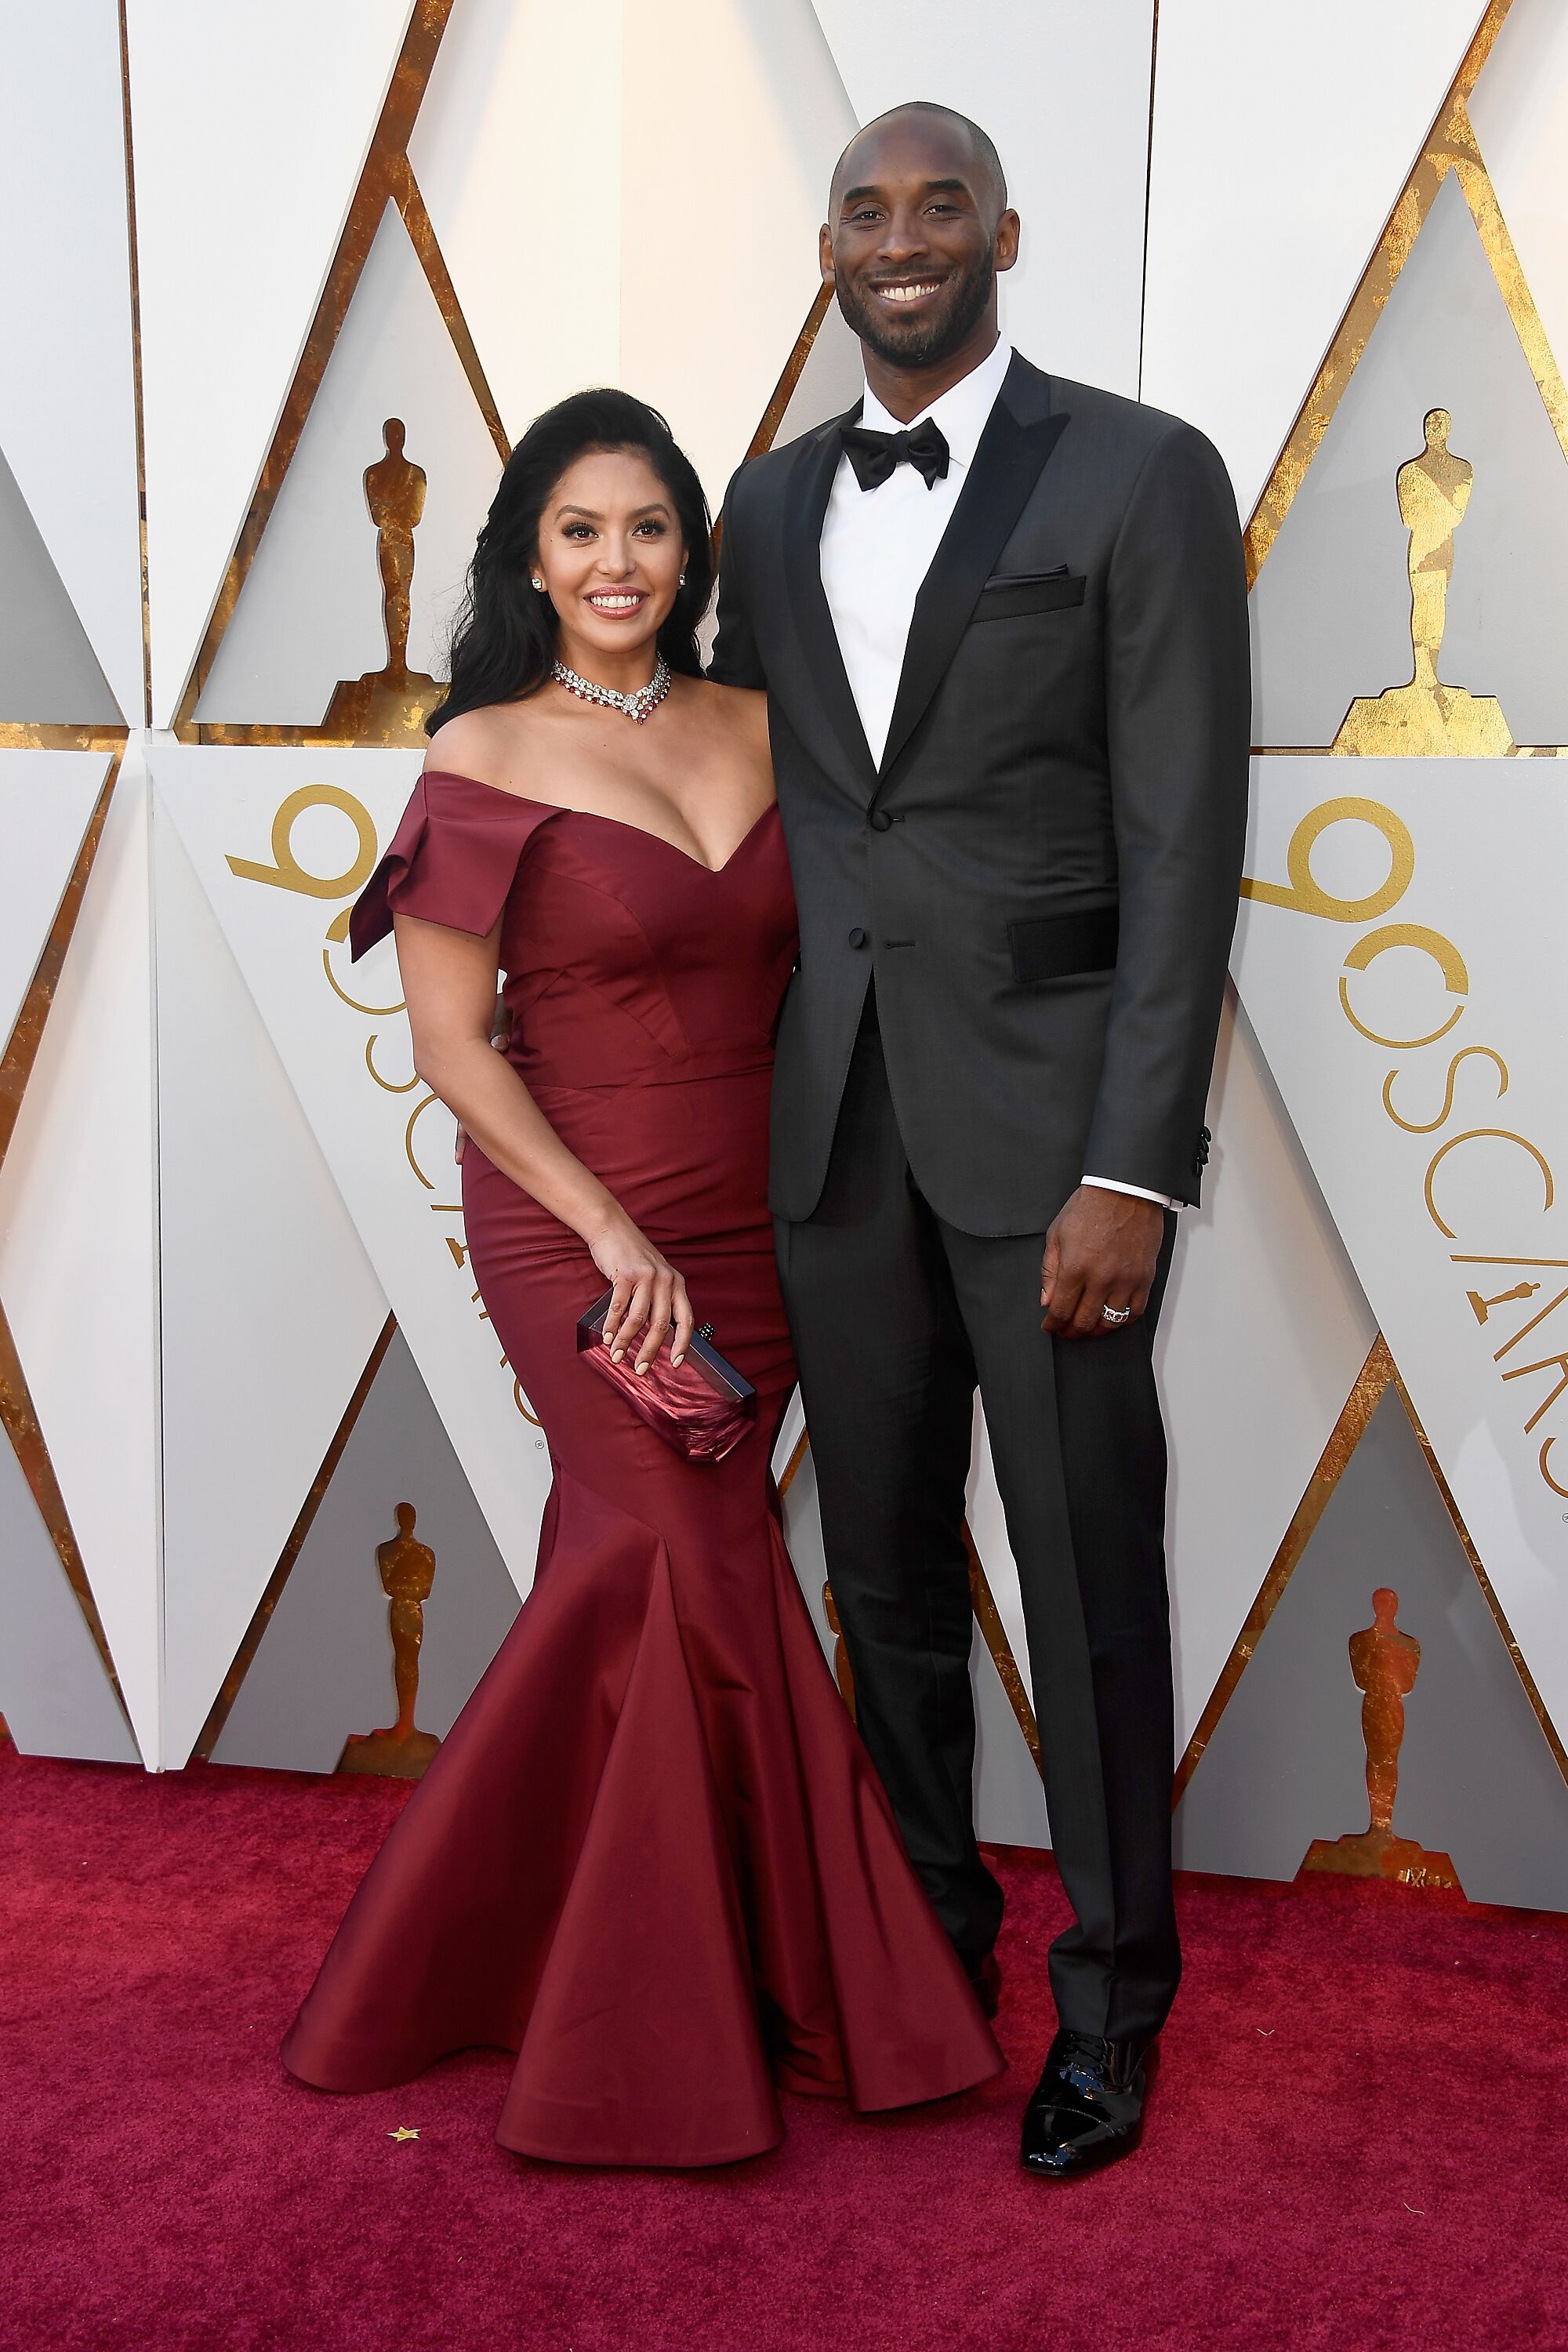 Vanessa Bryant & Kobe Bryant at the 90th Annual Academy Awards. | Source: Getty Images